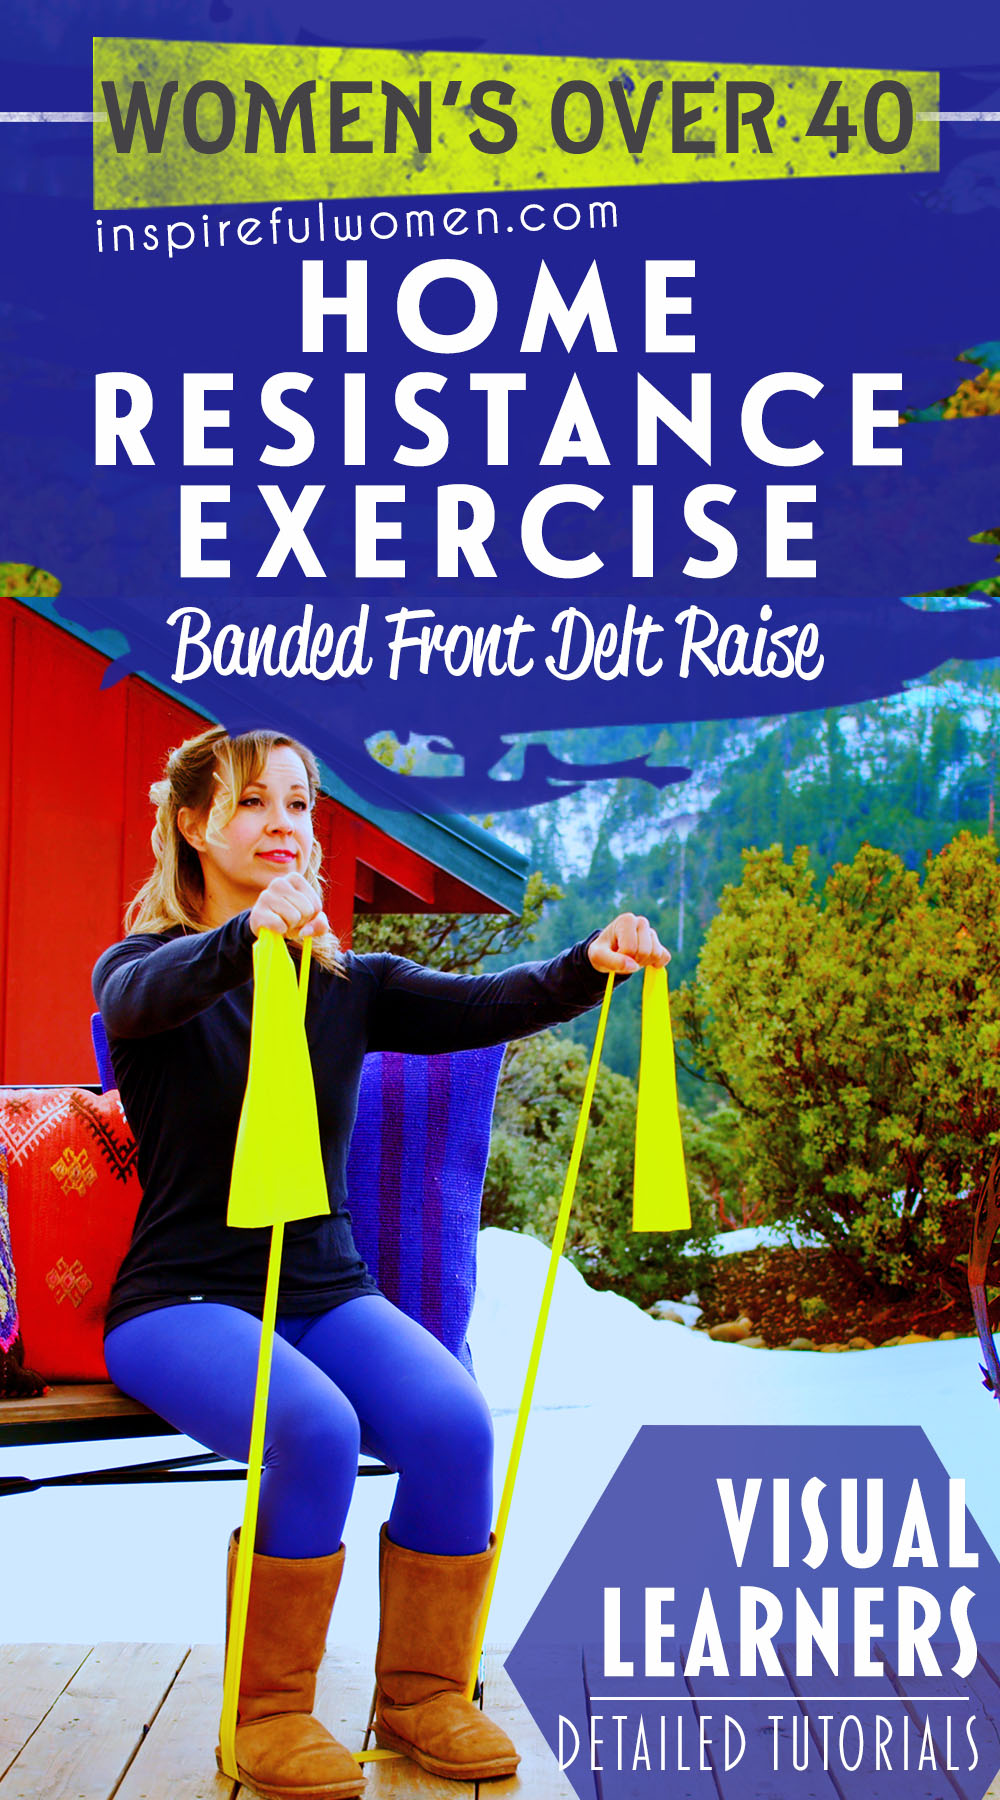 banded-front-deltoid-raise-resistance-exercise-at-home-women-over-40